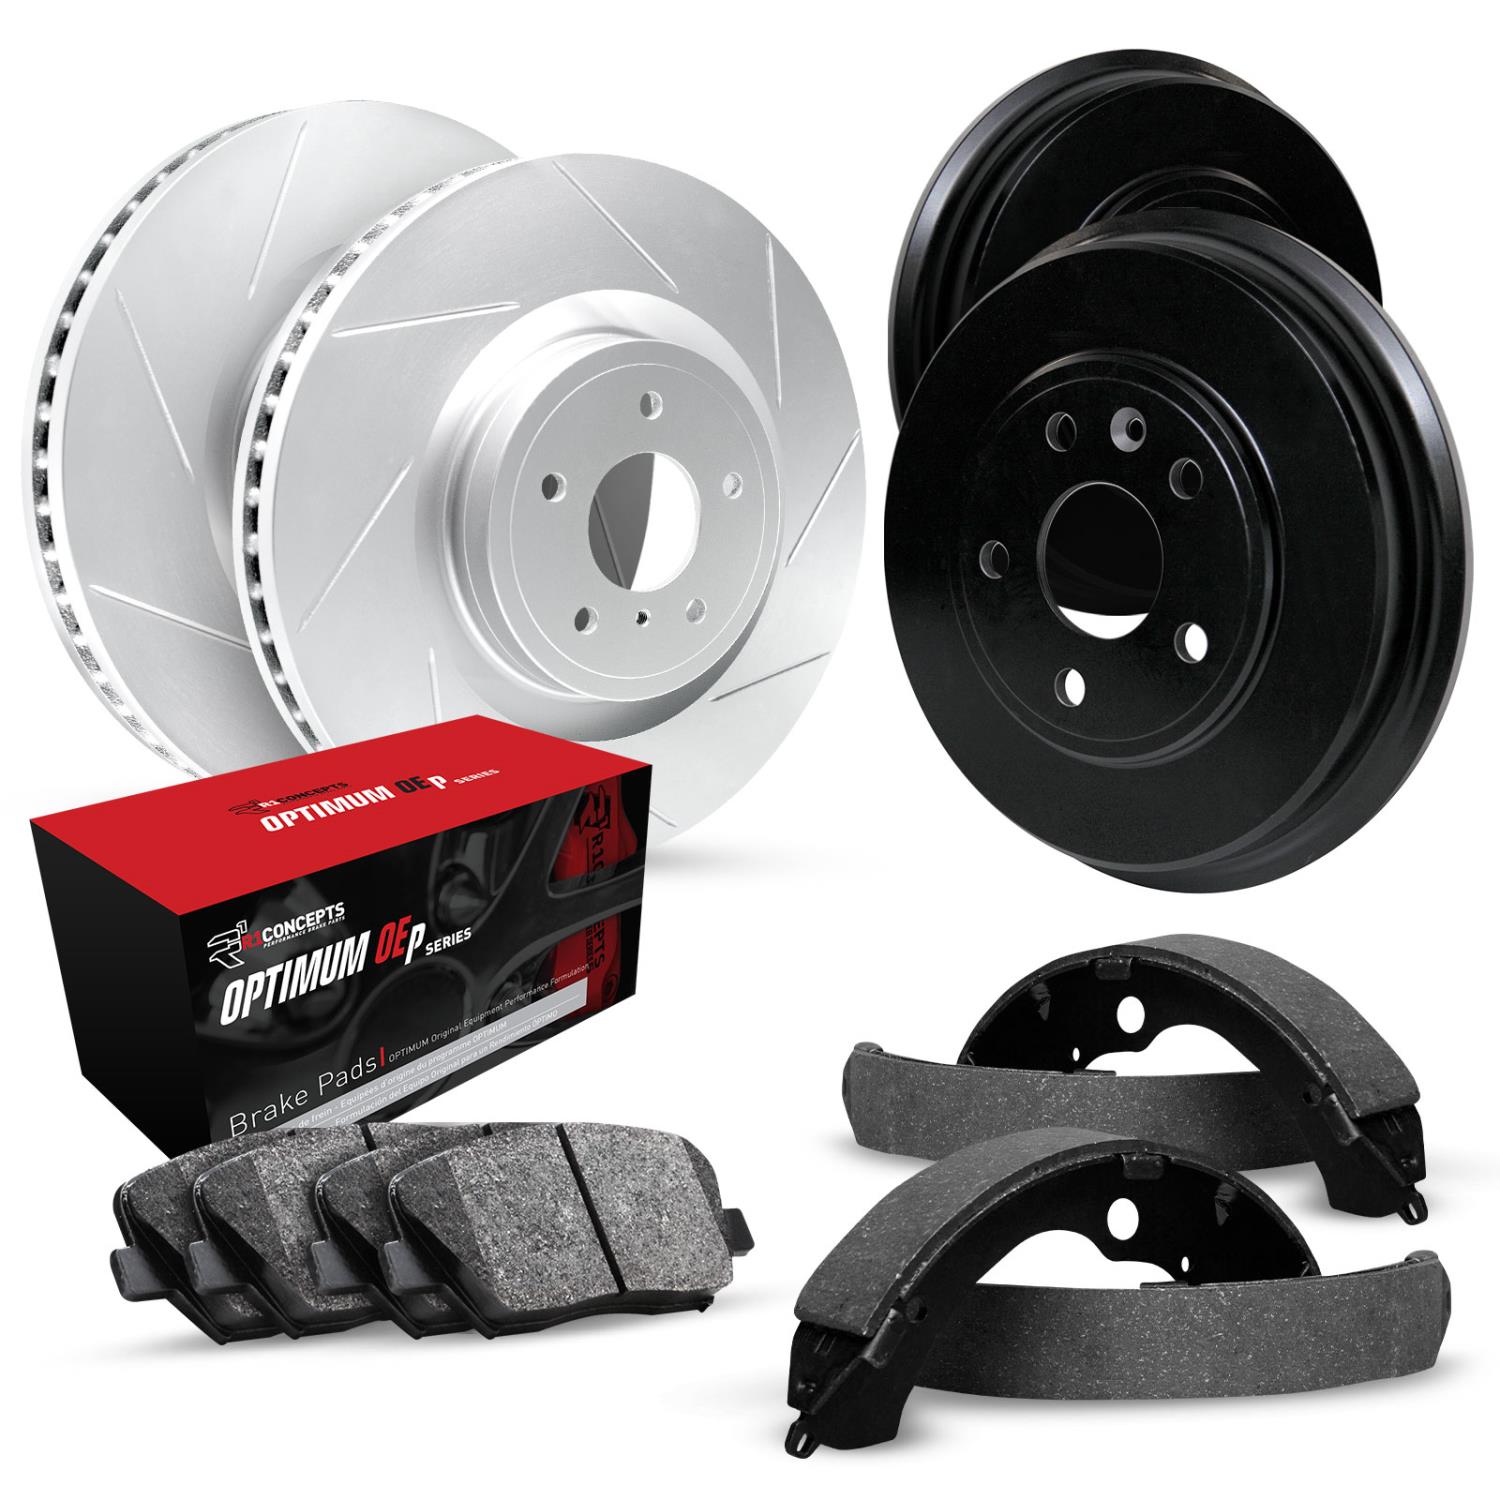 GEO-Carbon Slotted Brake Rotor & Drum Set w/Optimum OE Pads & Shoes, 1995-2000 GM, Position: Front & Rear